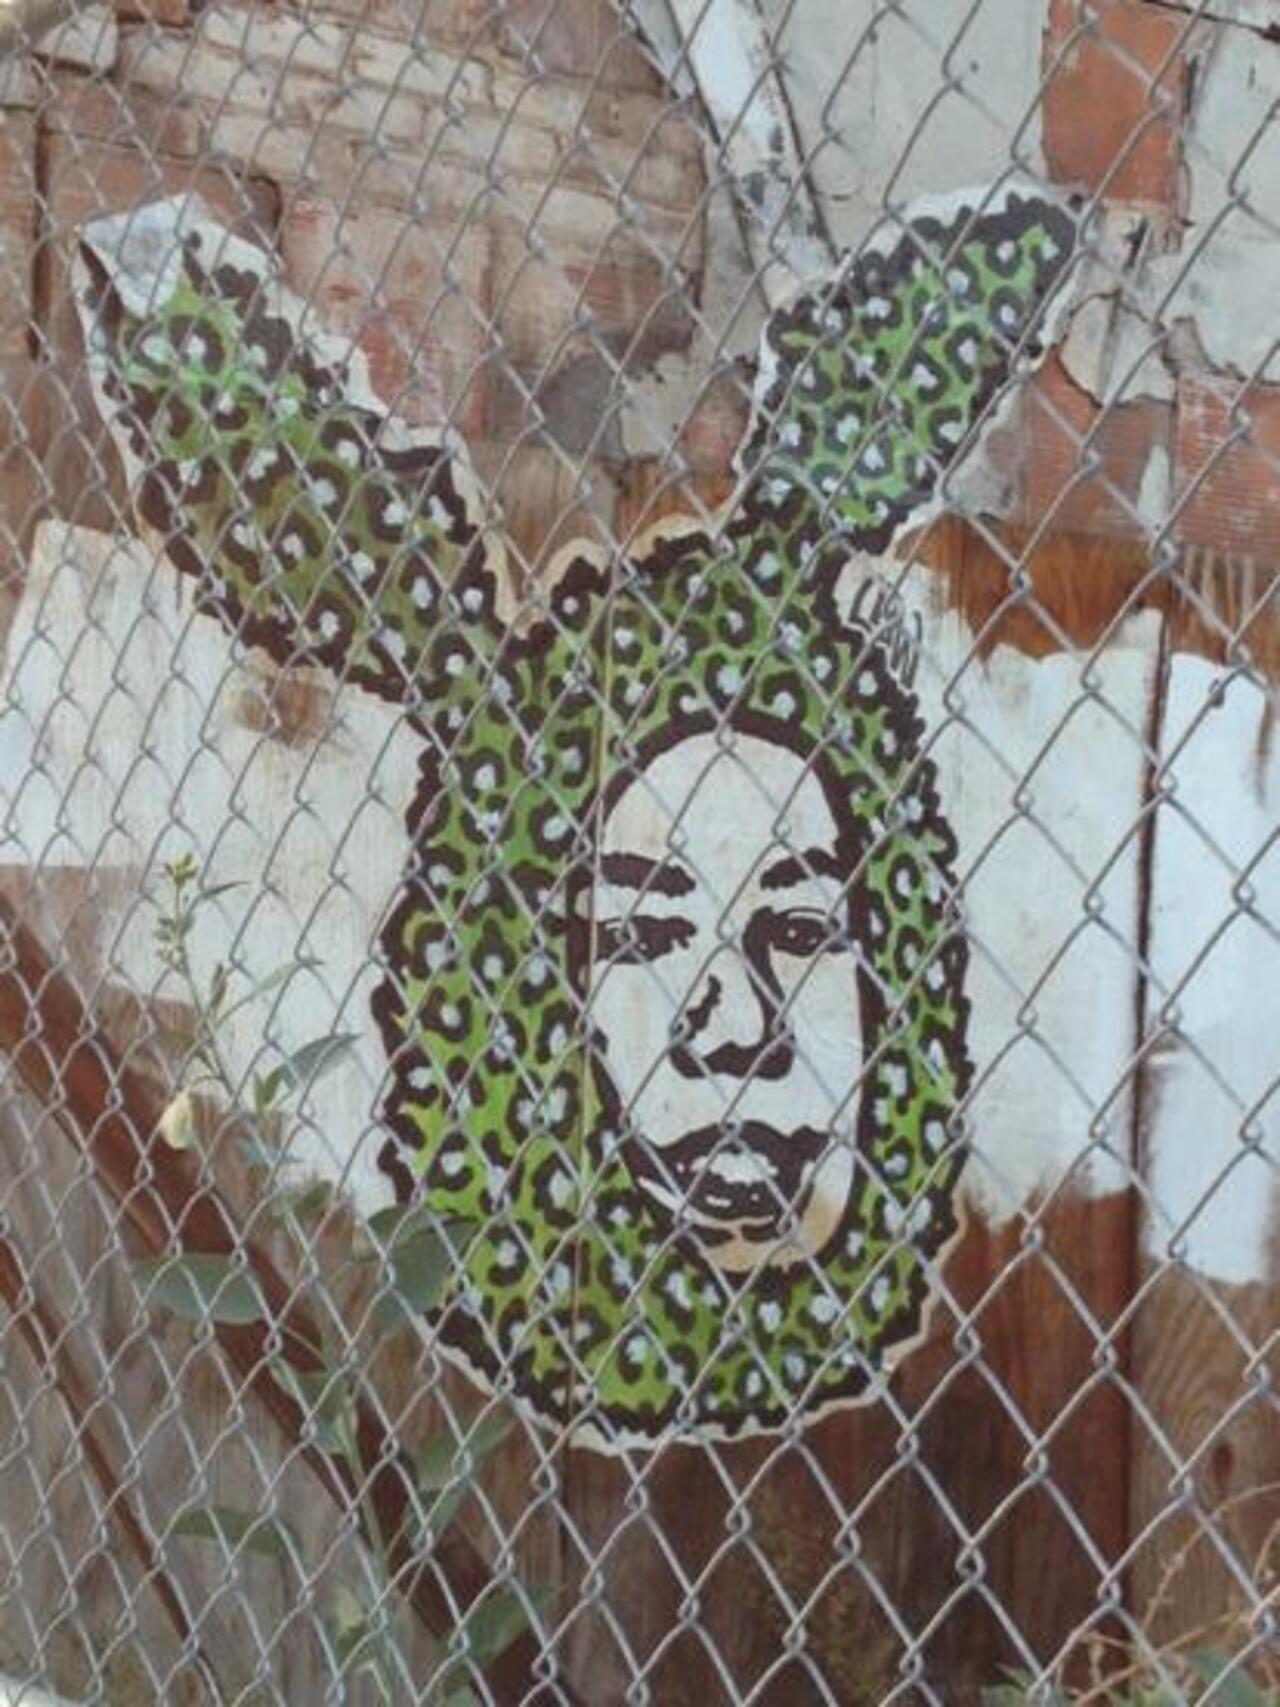 The bunny ears come out in downtown #SanDiego! #Streetart #Graffiti photo by me! #graphicdesign http://t.co/qoHE7Zj9Ir